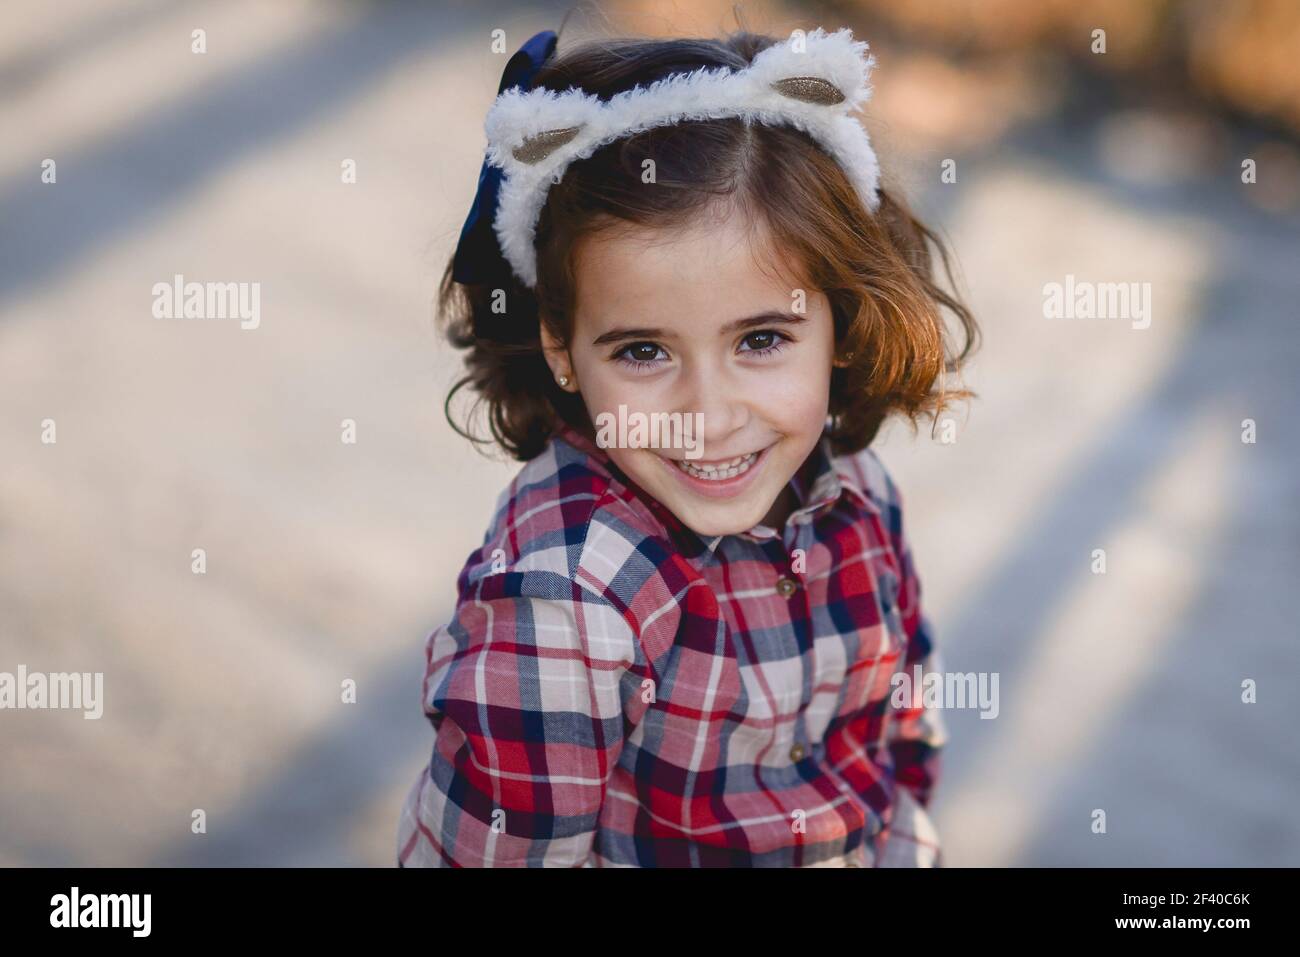 Adorable petite fille Happy smiling outdoors. Banque D'Images